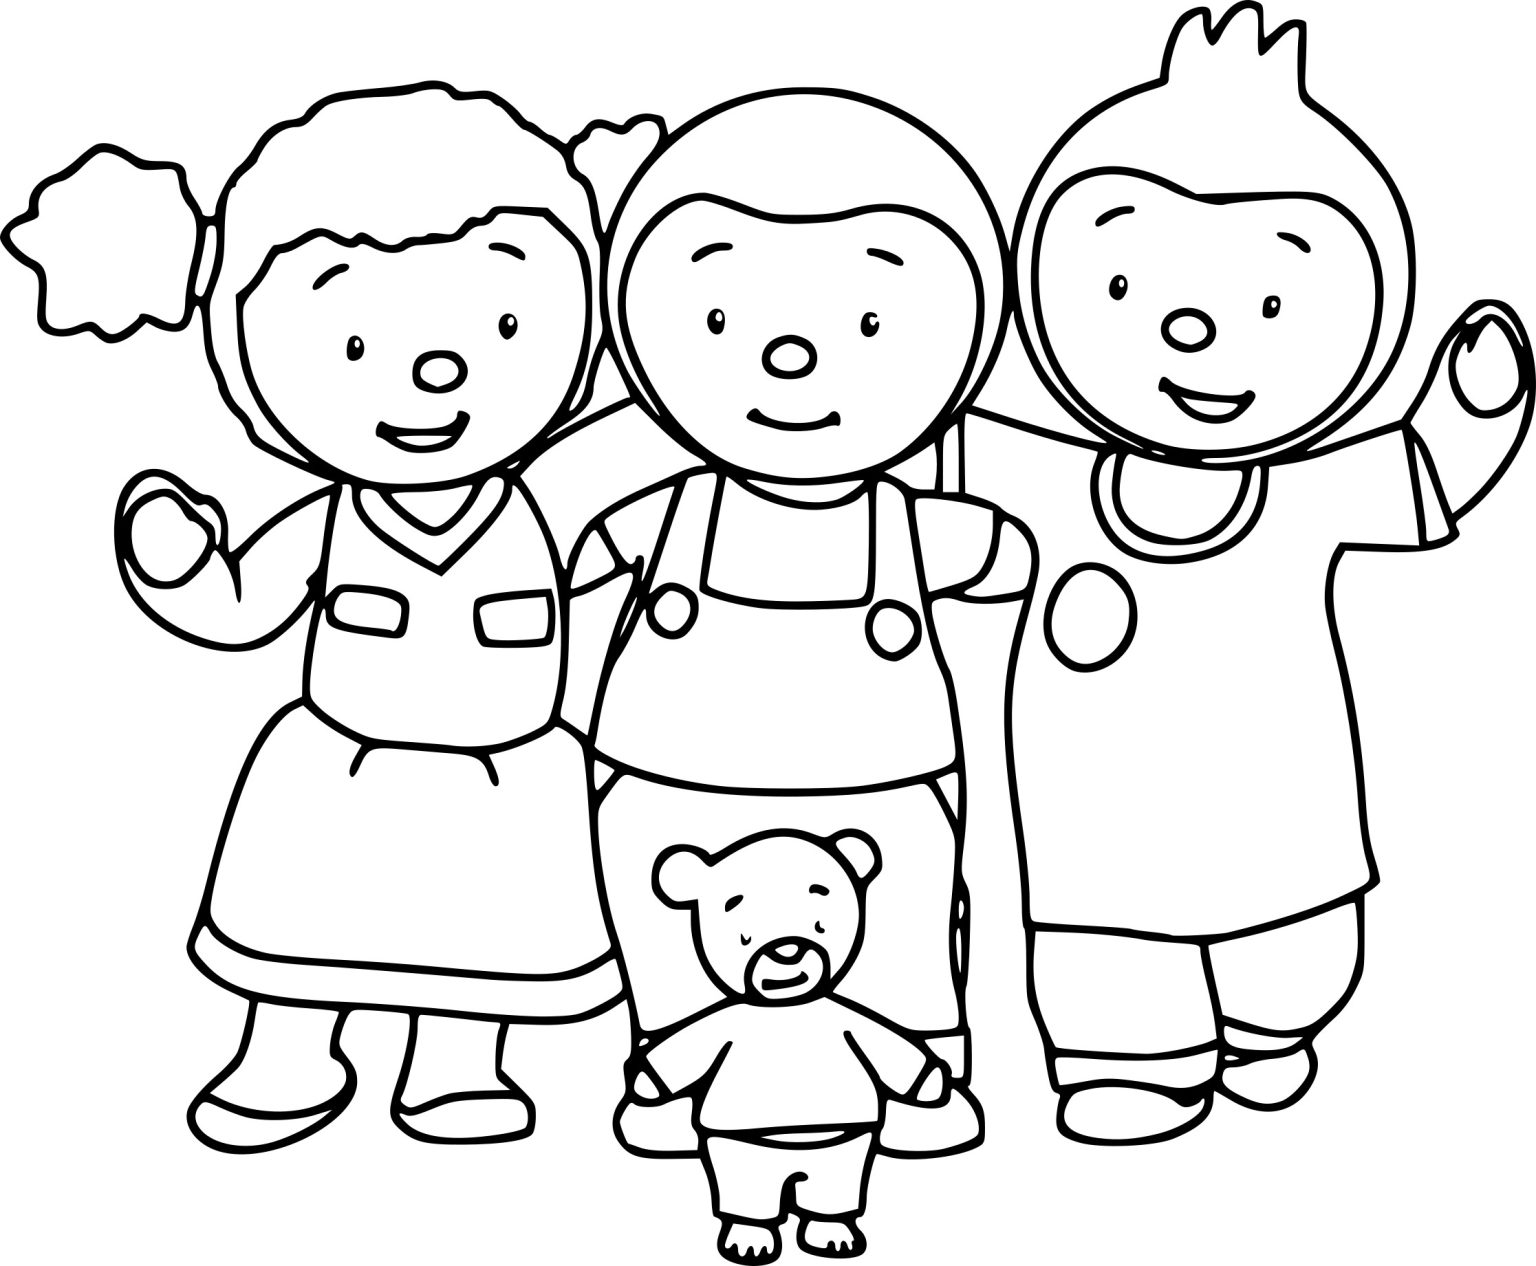 Fun T'choupi Coloring Pages Printable for kids